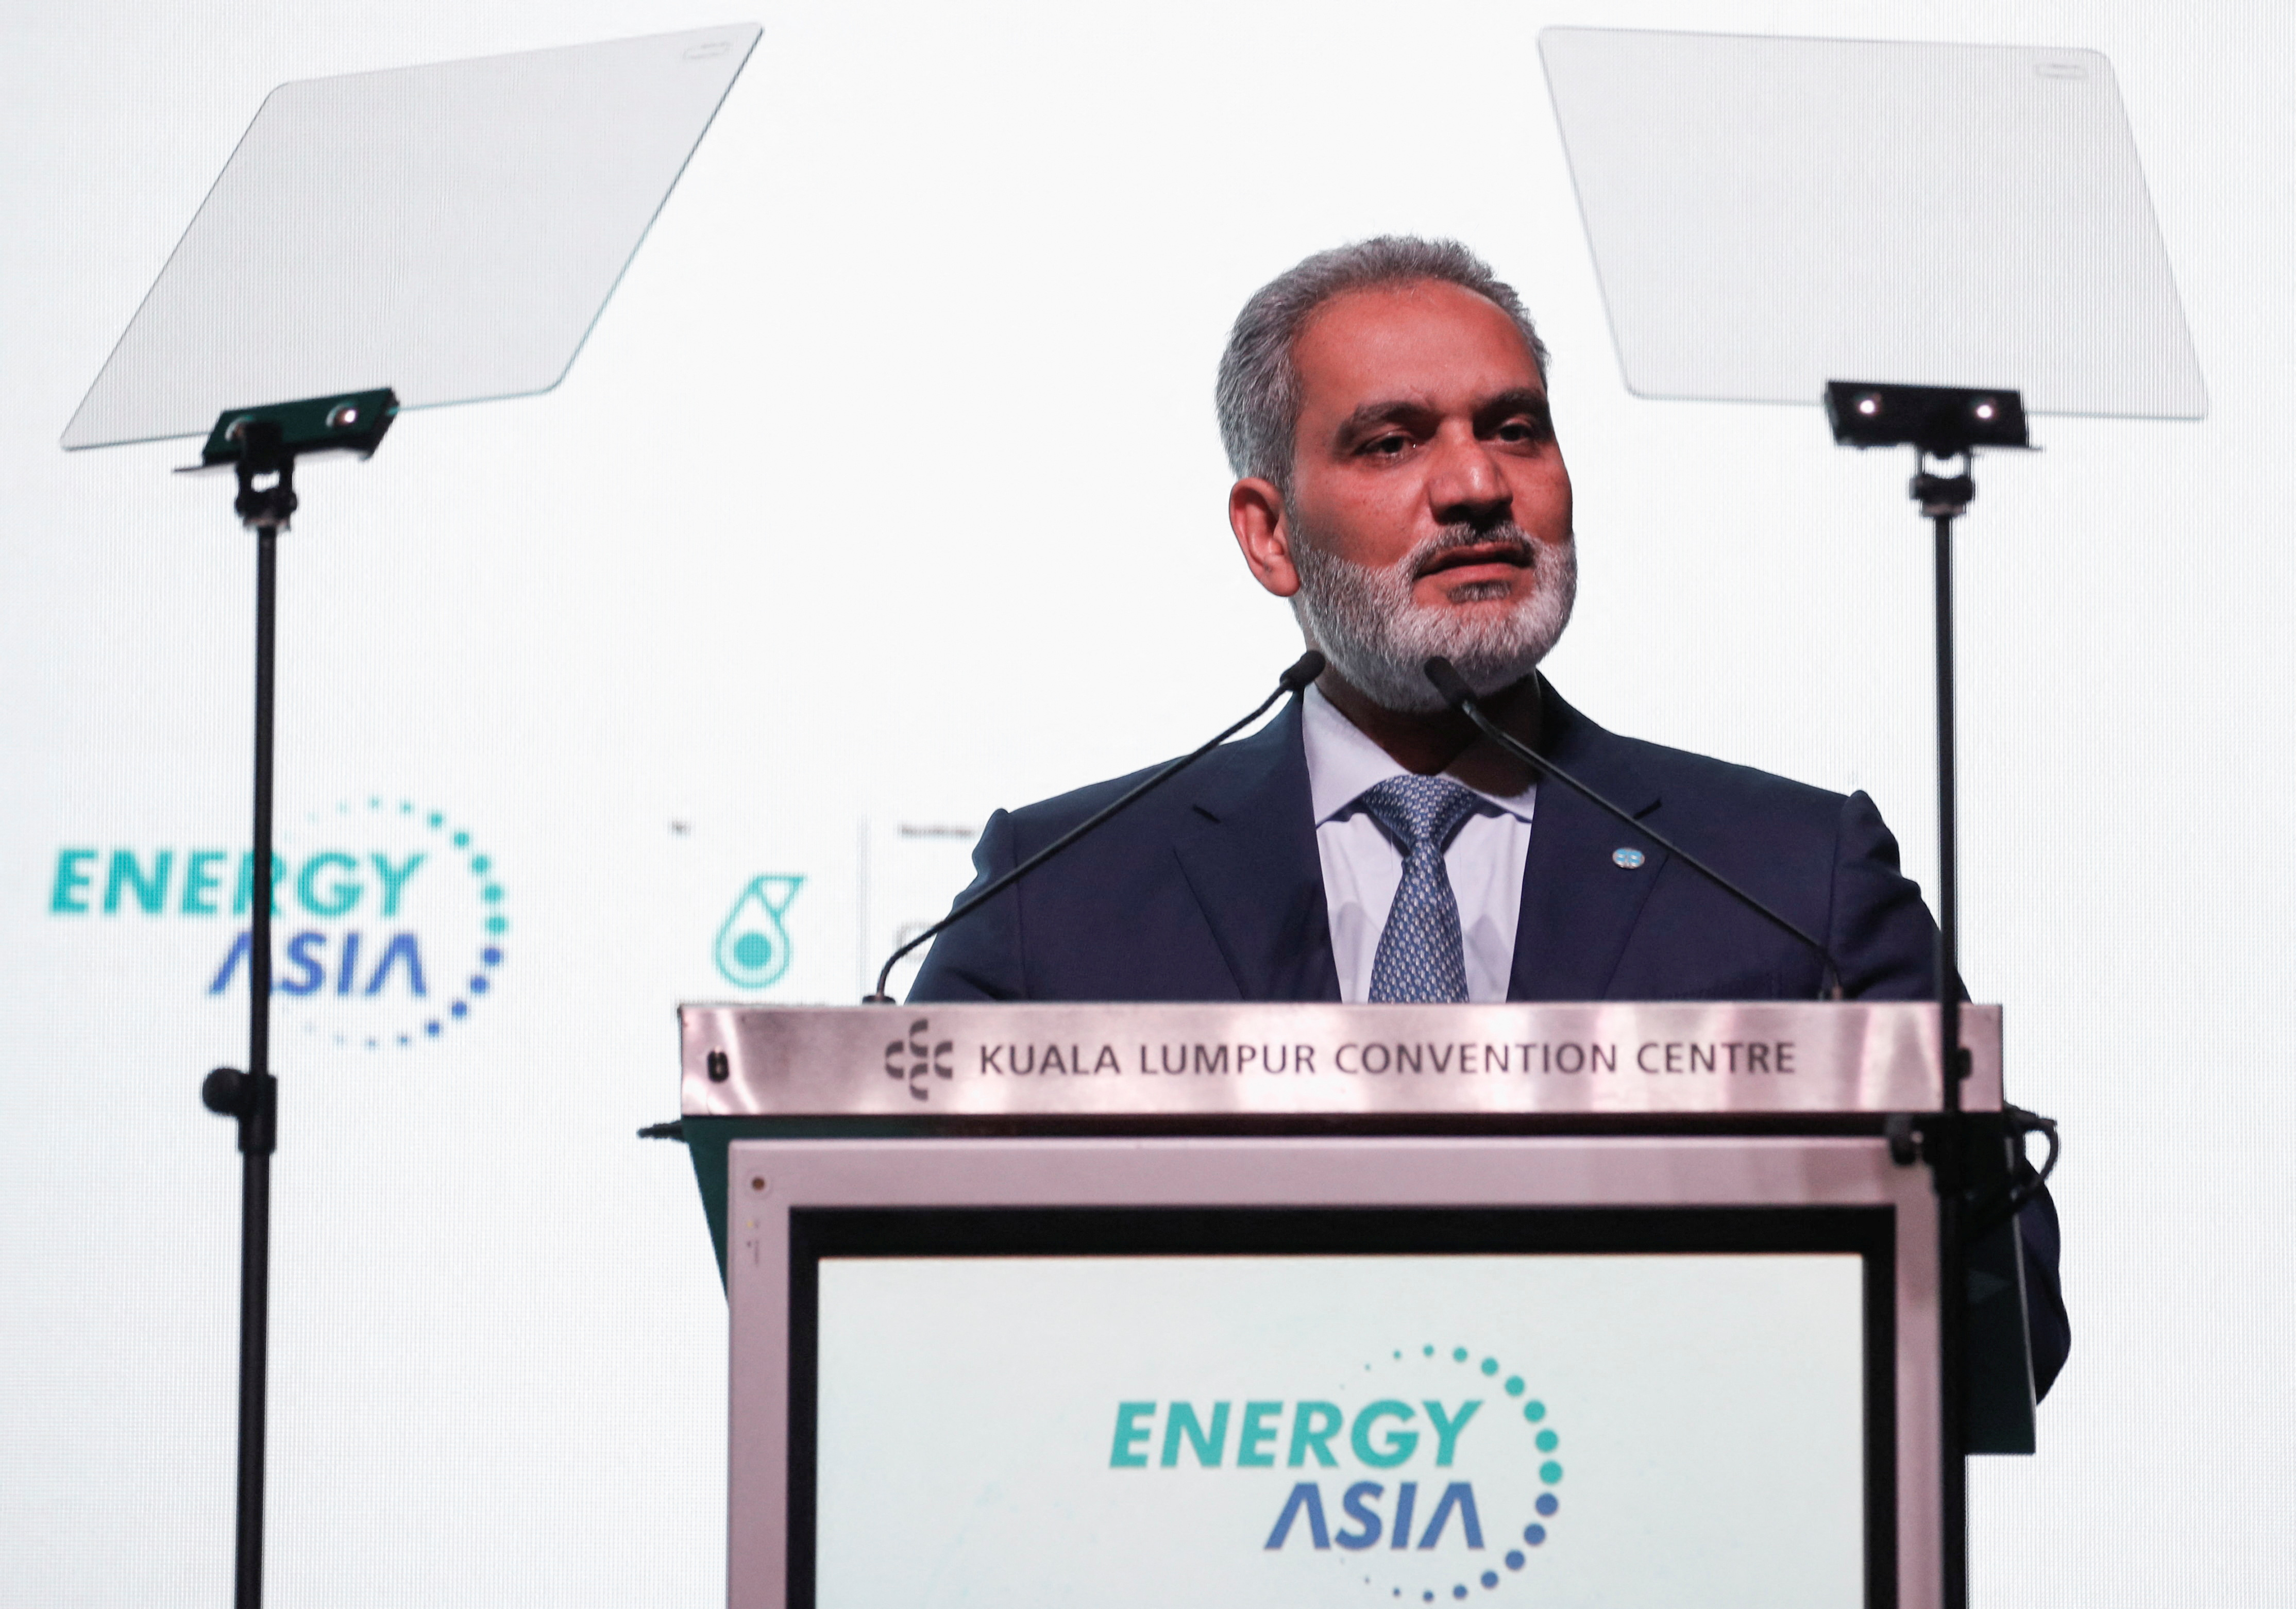 Secretary General of Organization of the Petroleum Exporting Countries (OPEC) Haitham Al Ghais speaks during the Energy Asia conference in Kuala Lumpur